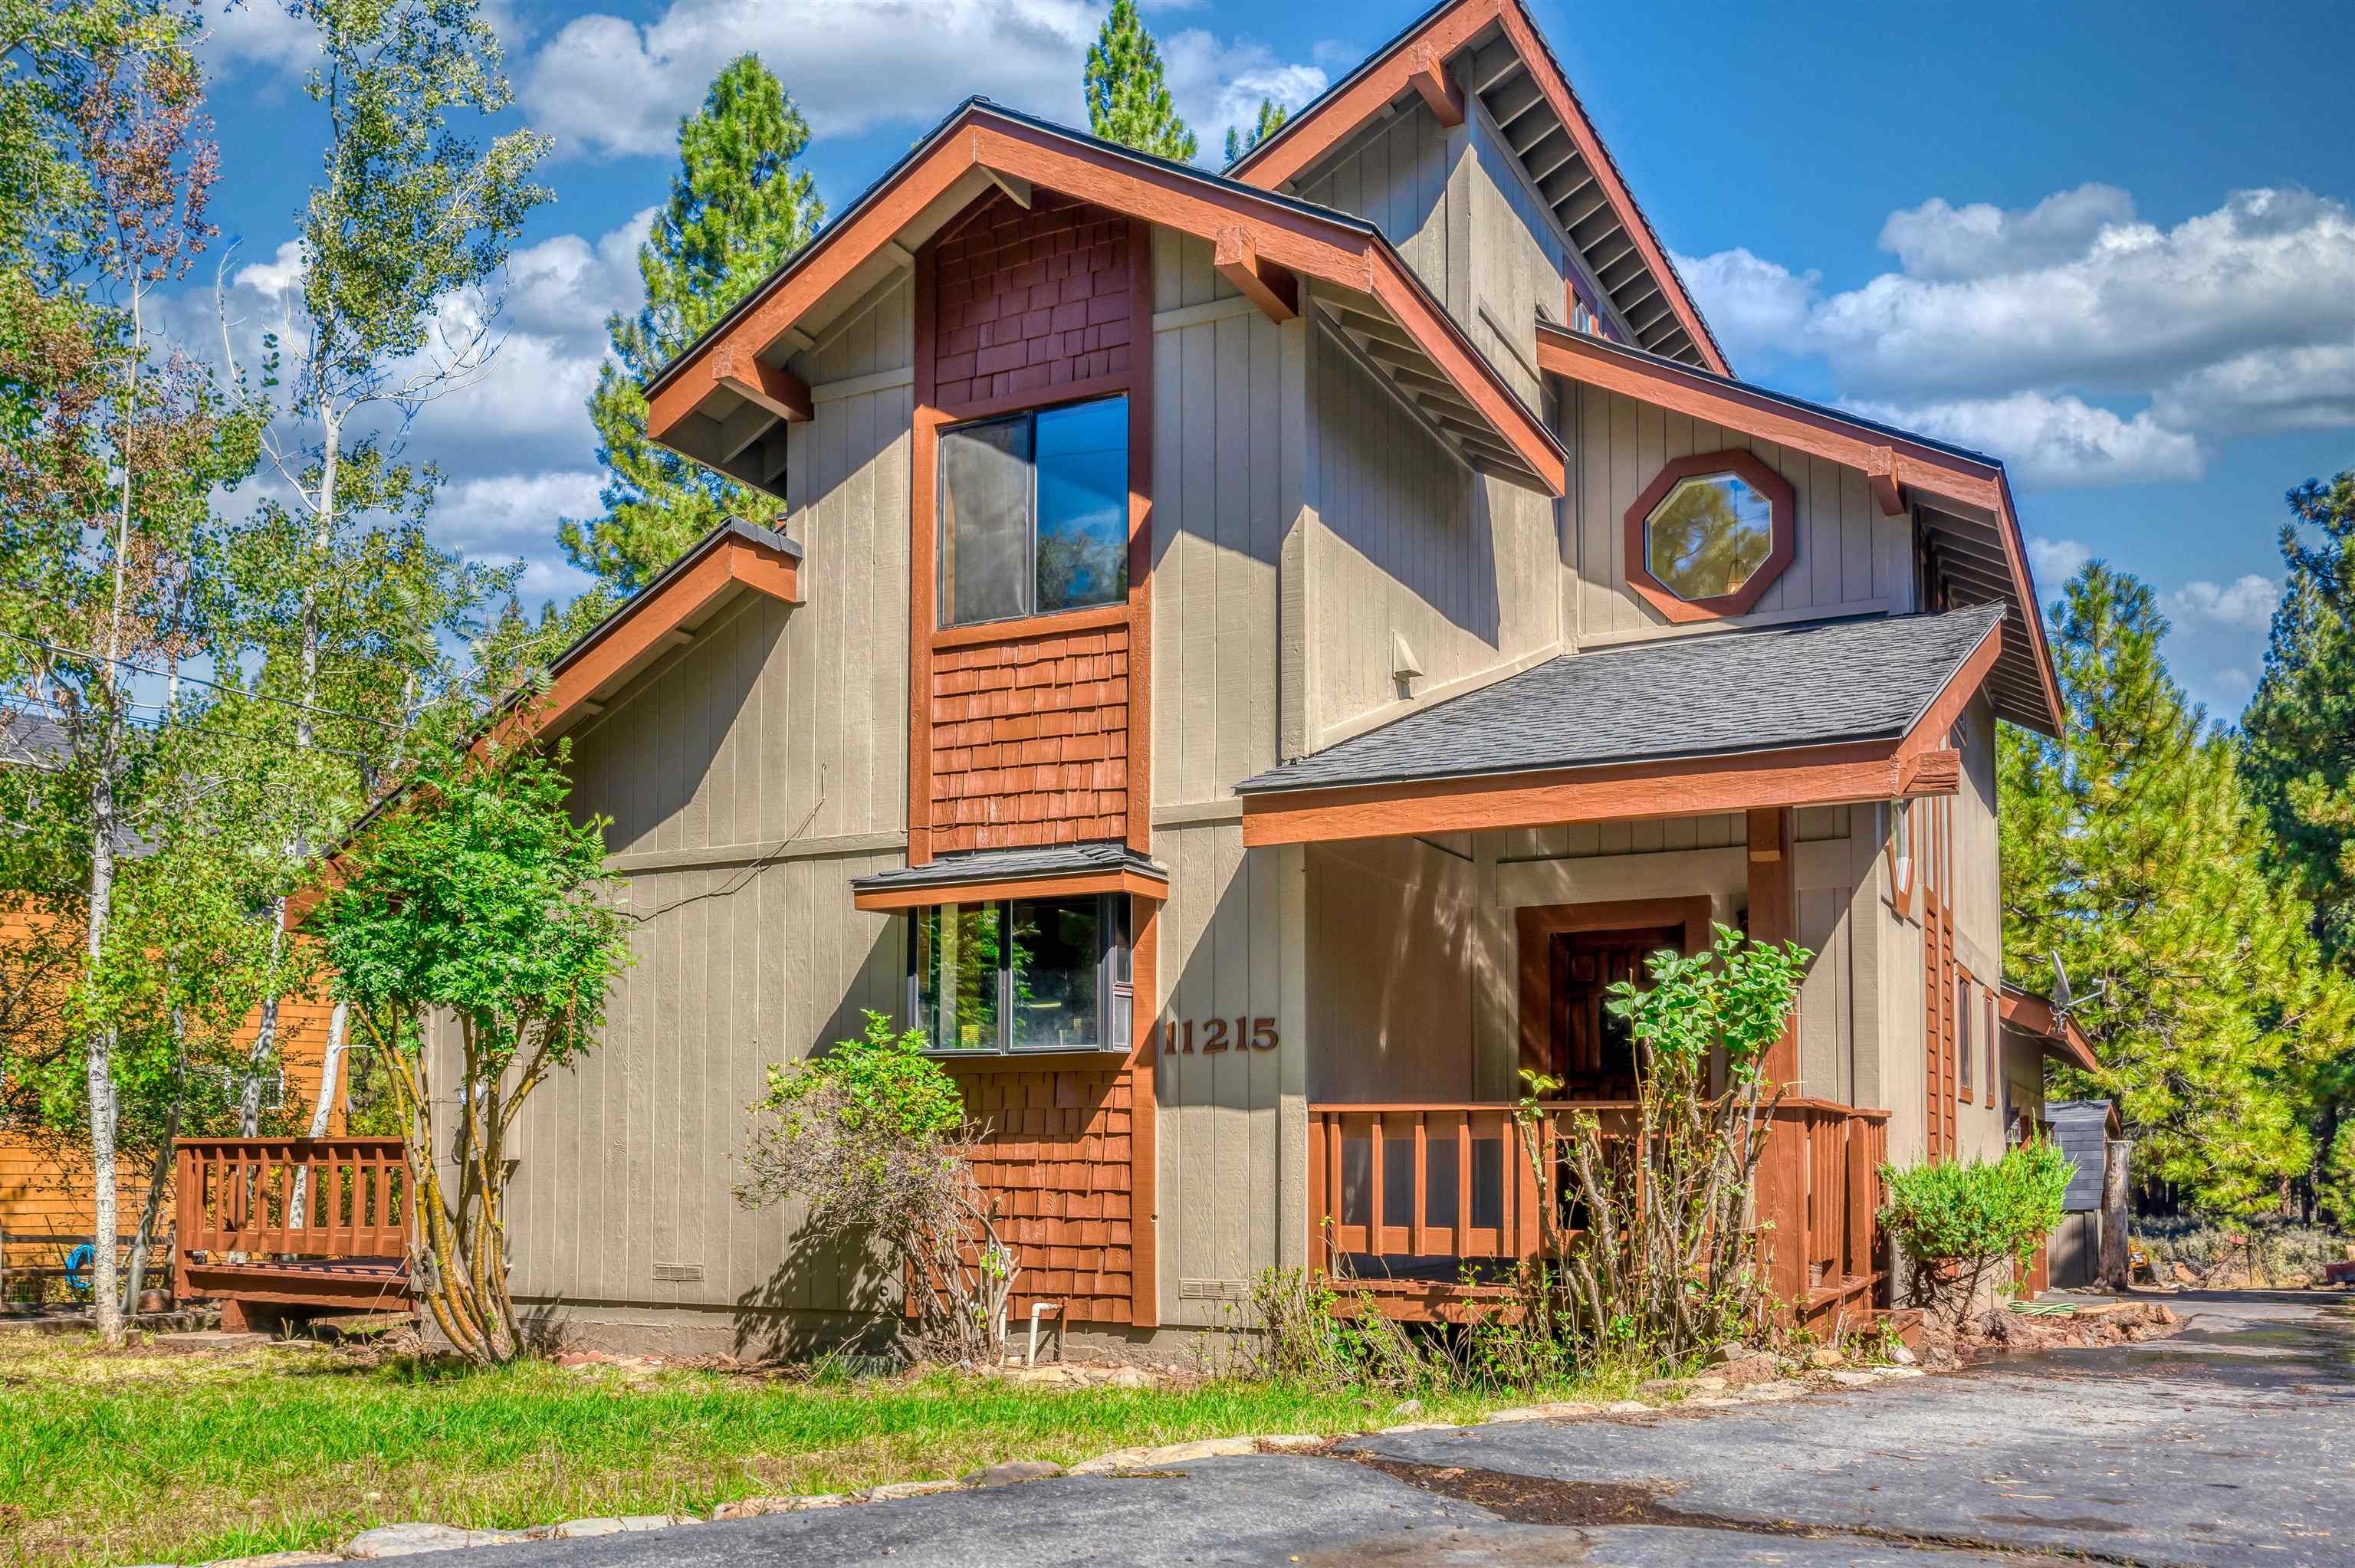 Image for 11215 Huntsman Leap, Truckee, CA 96161-1412